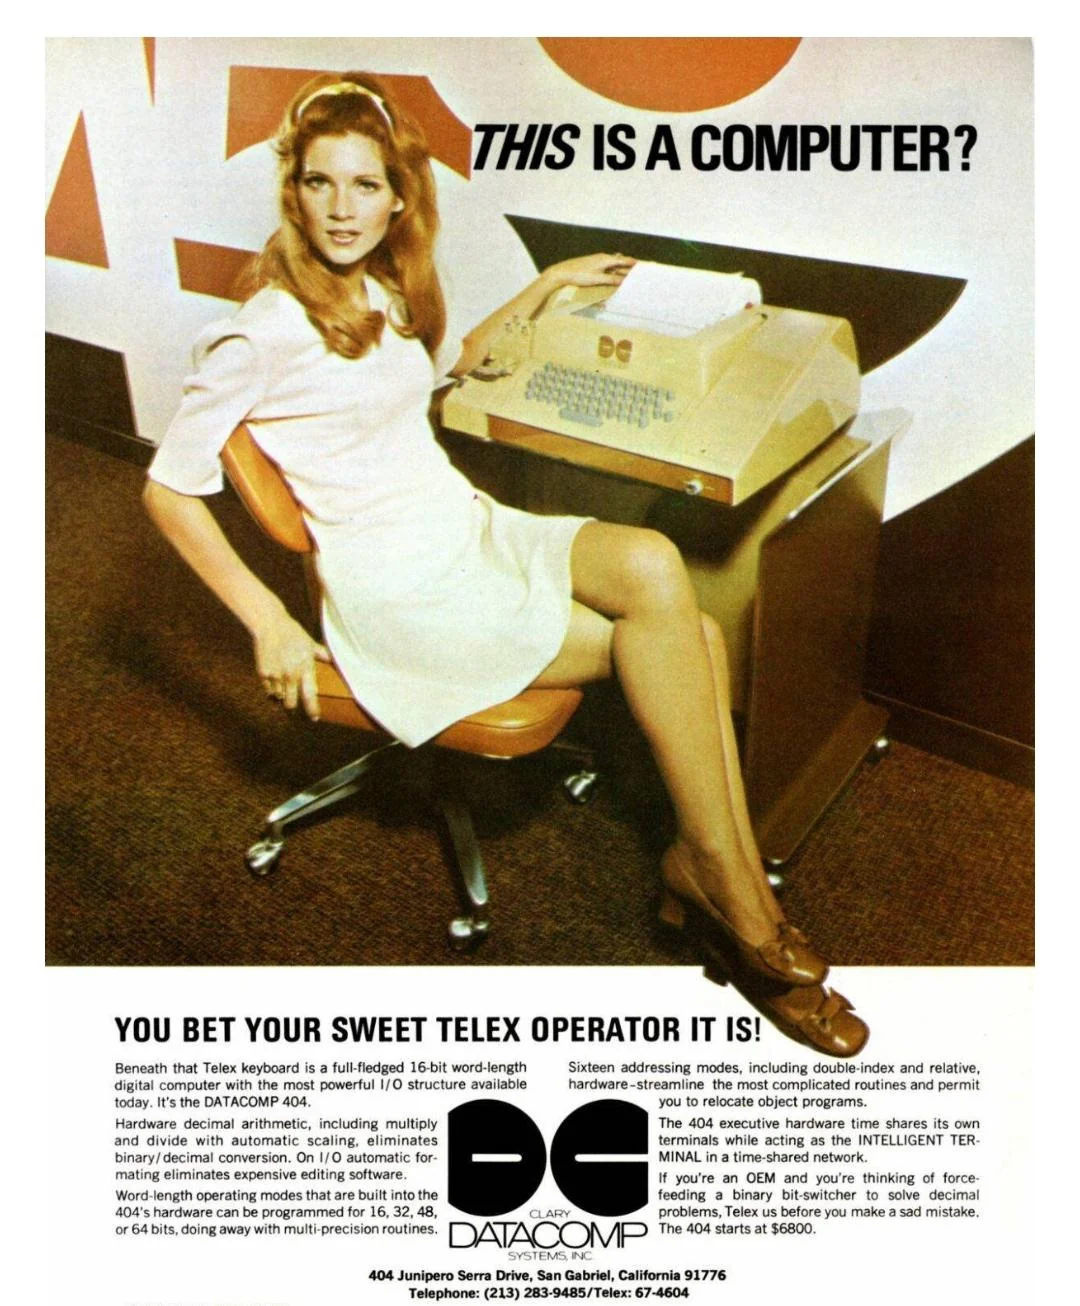 THIS IS A COMPUTER? YOU BET YOUR SWEET TELEX OPERATOR IT IS!